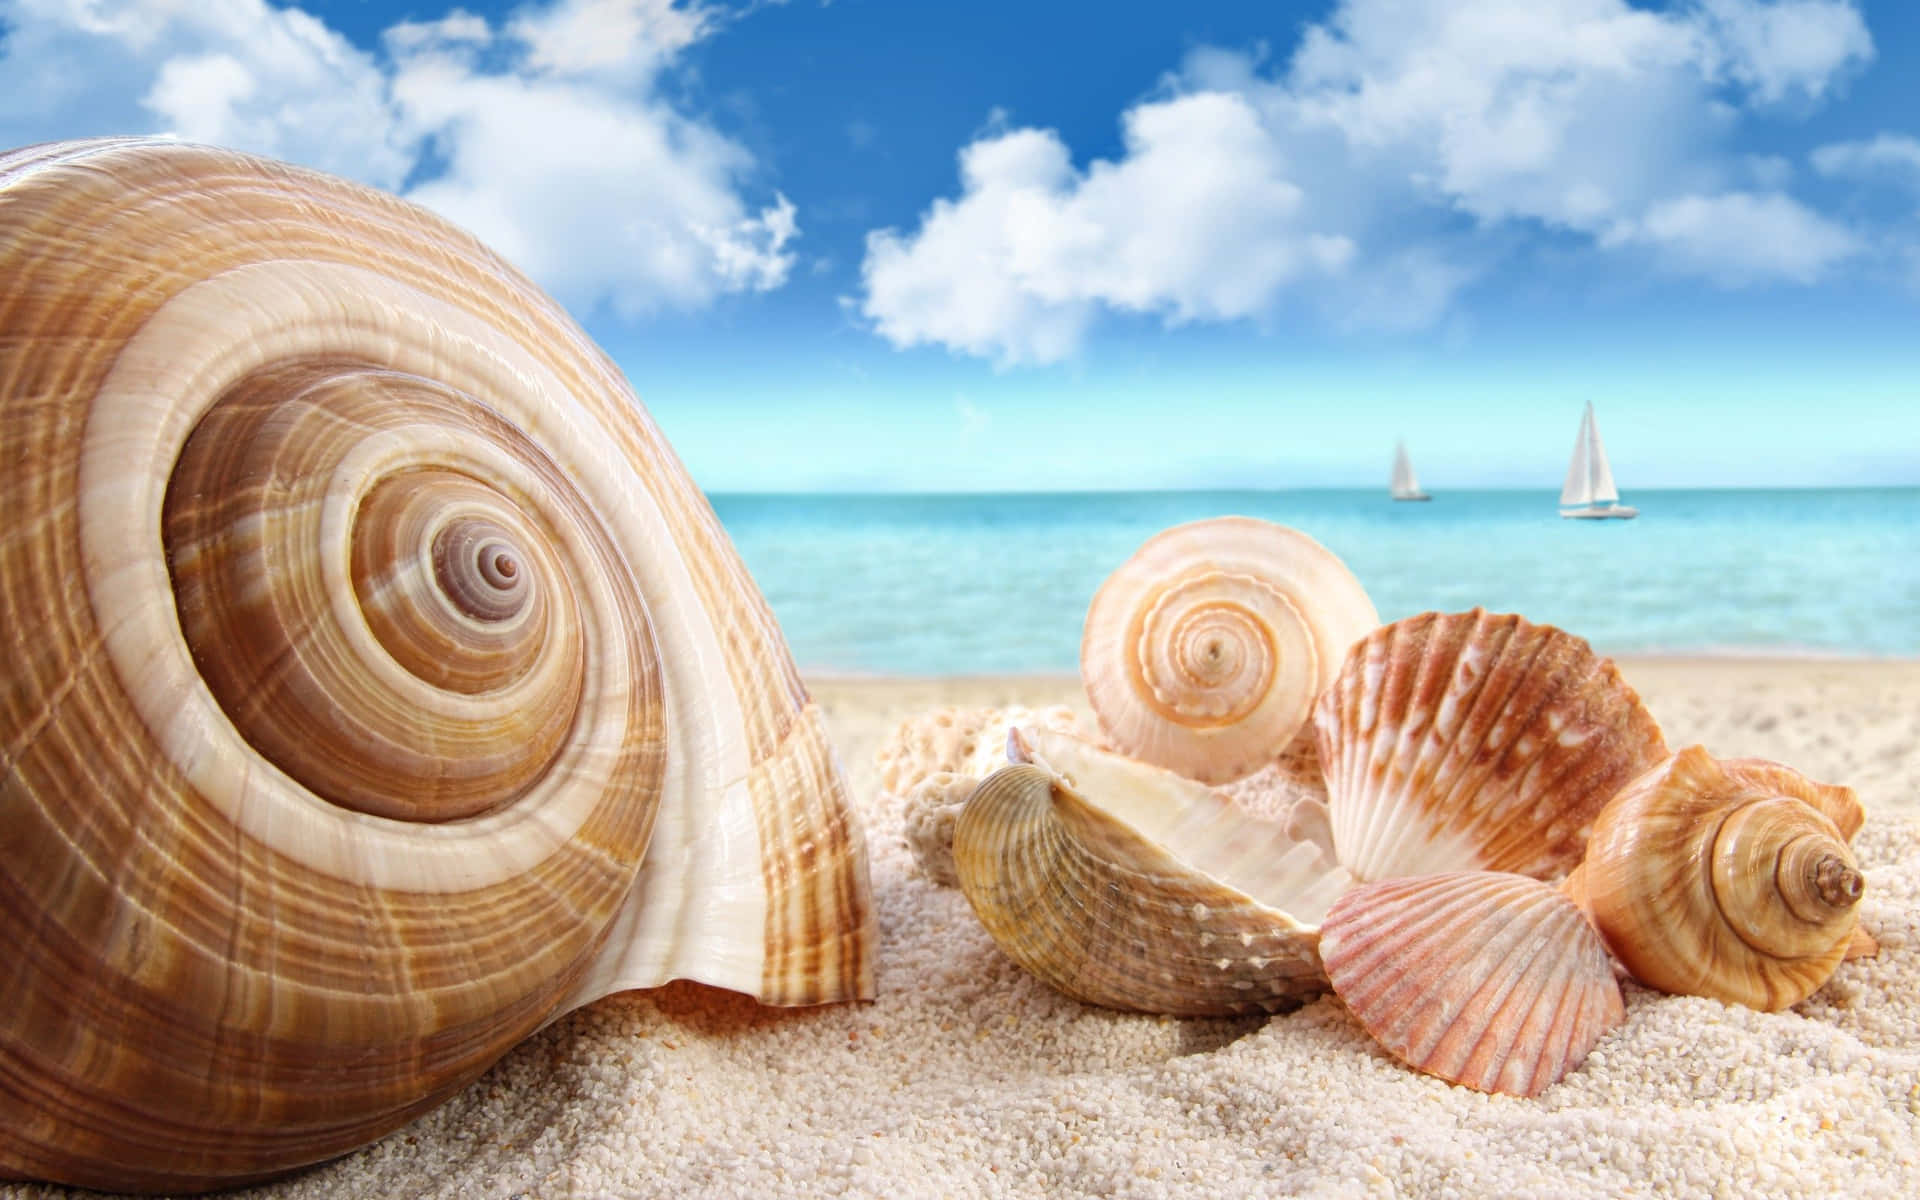 Seashell Sanctuary: A Curated Collection Of Seashells